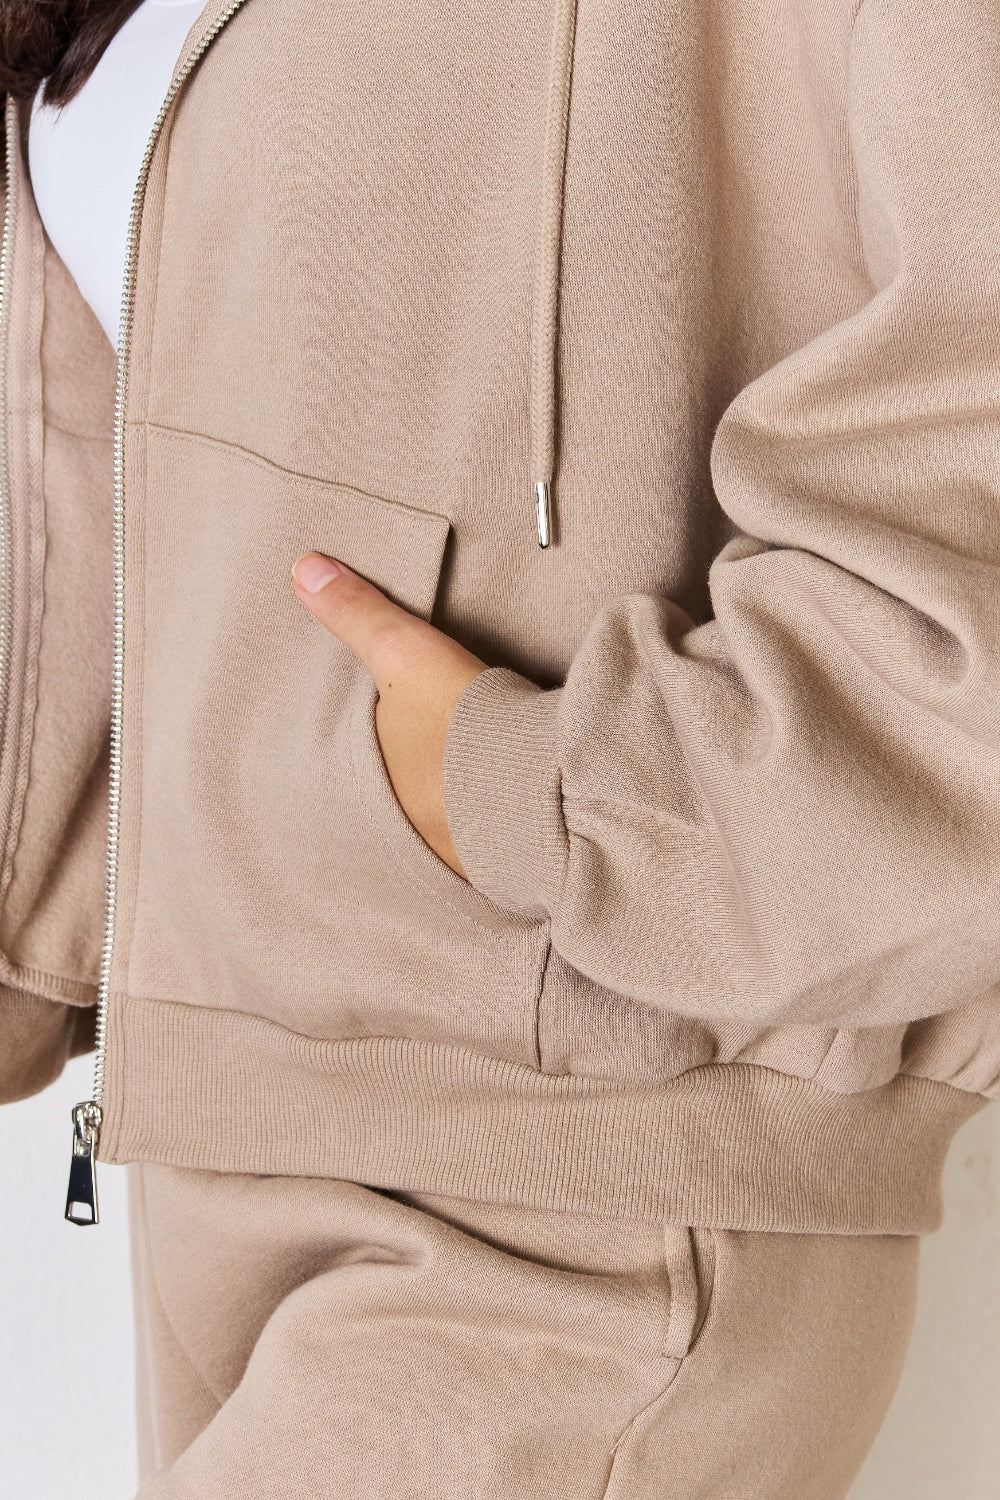 RISEN Oversized Lounge Hoodie - Inspired Eye Boutique